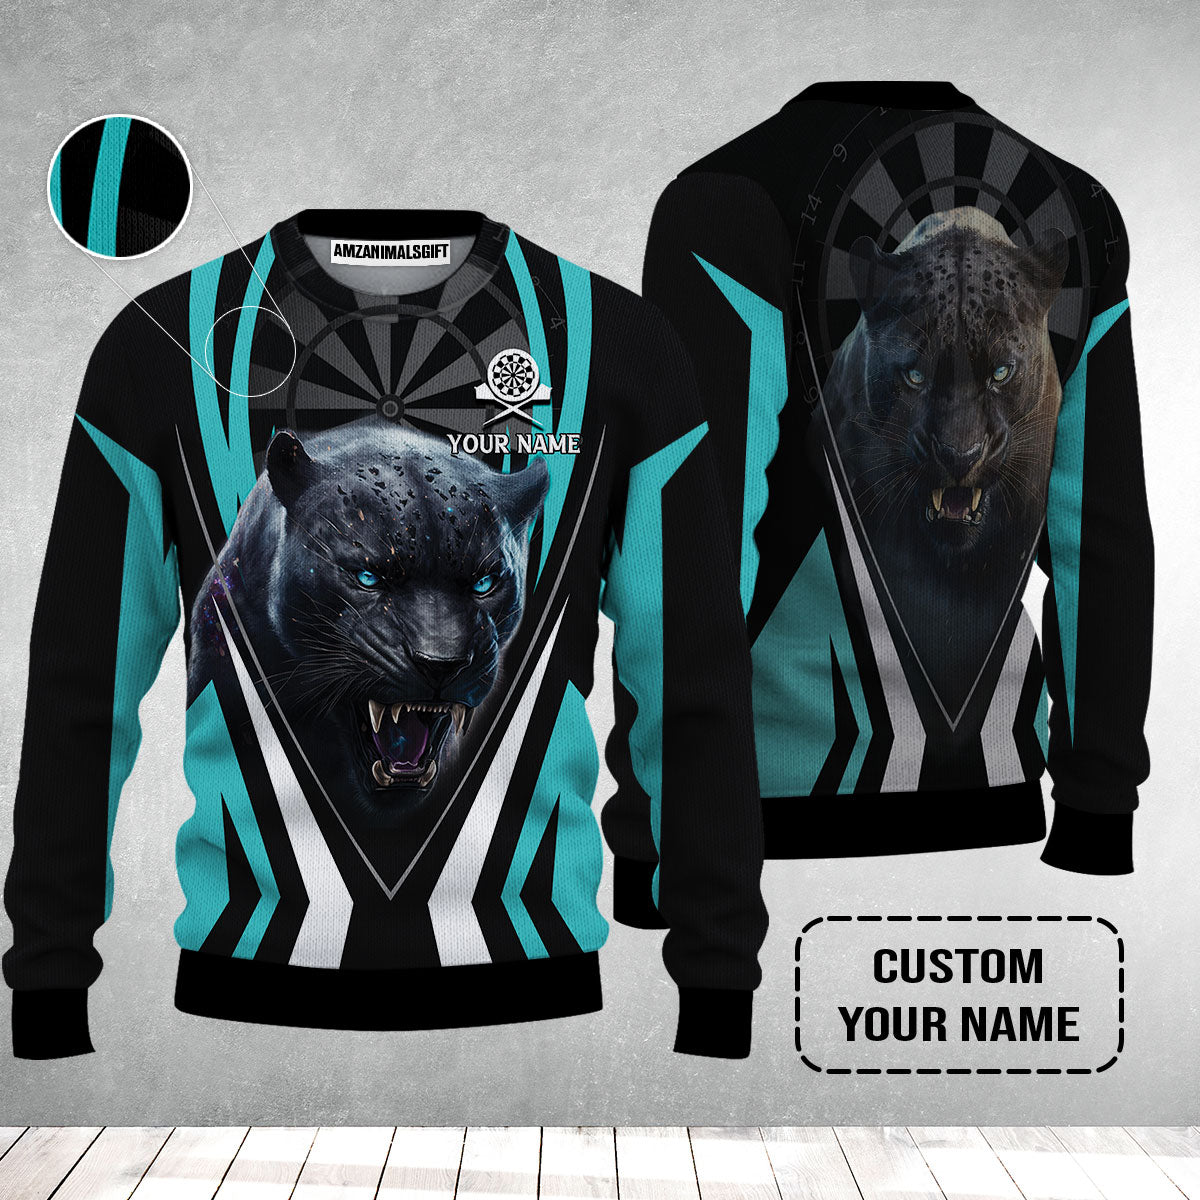 Black Panther And Darts Custom Name Sweater, Bullseye Dartboard Personalized Sweater - Gift For Darts Lovers, Friends